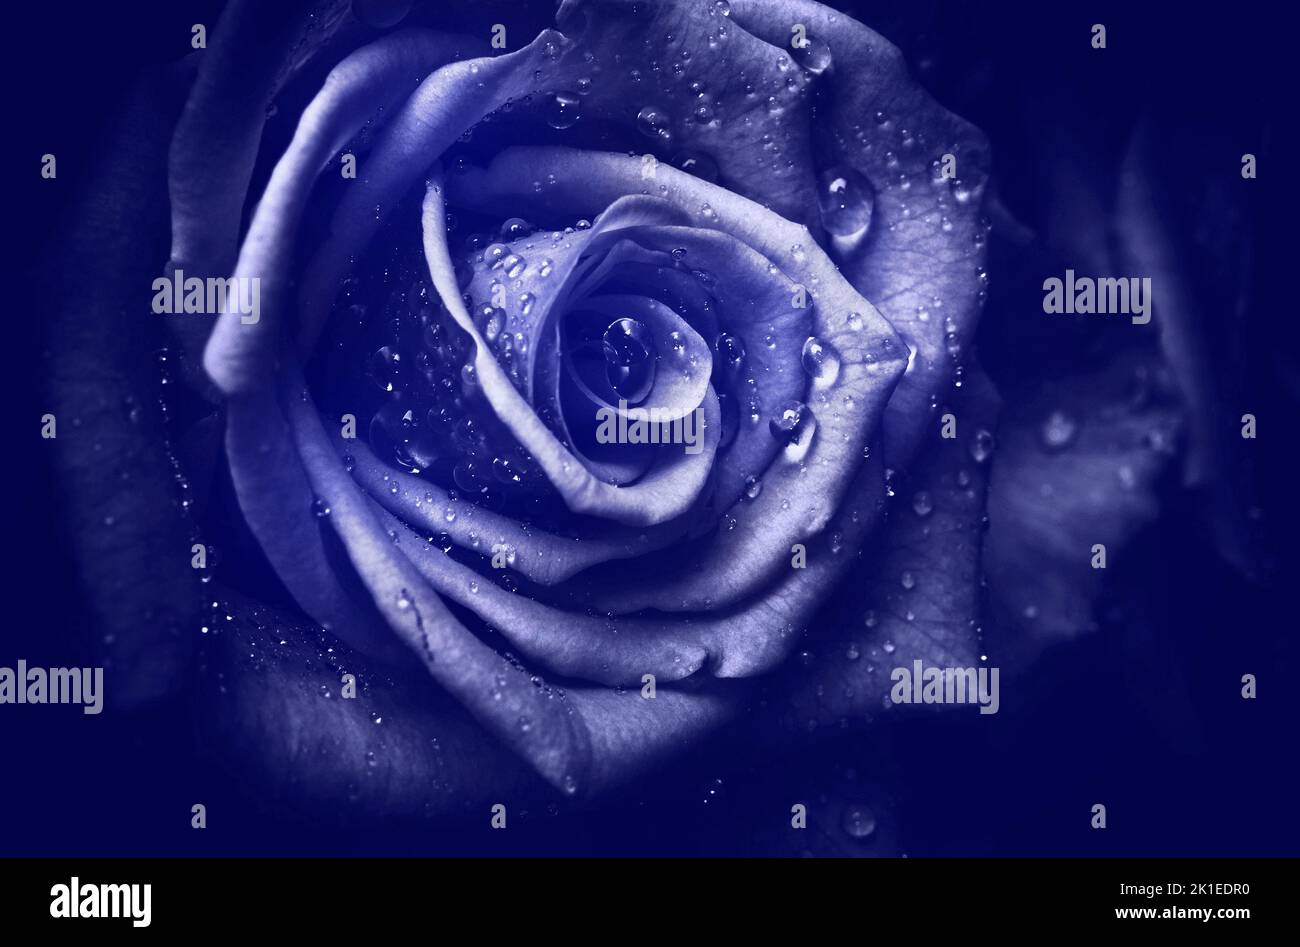 artistic image of flower romantic rose with drops of water like like flowery art Stock Photo